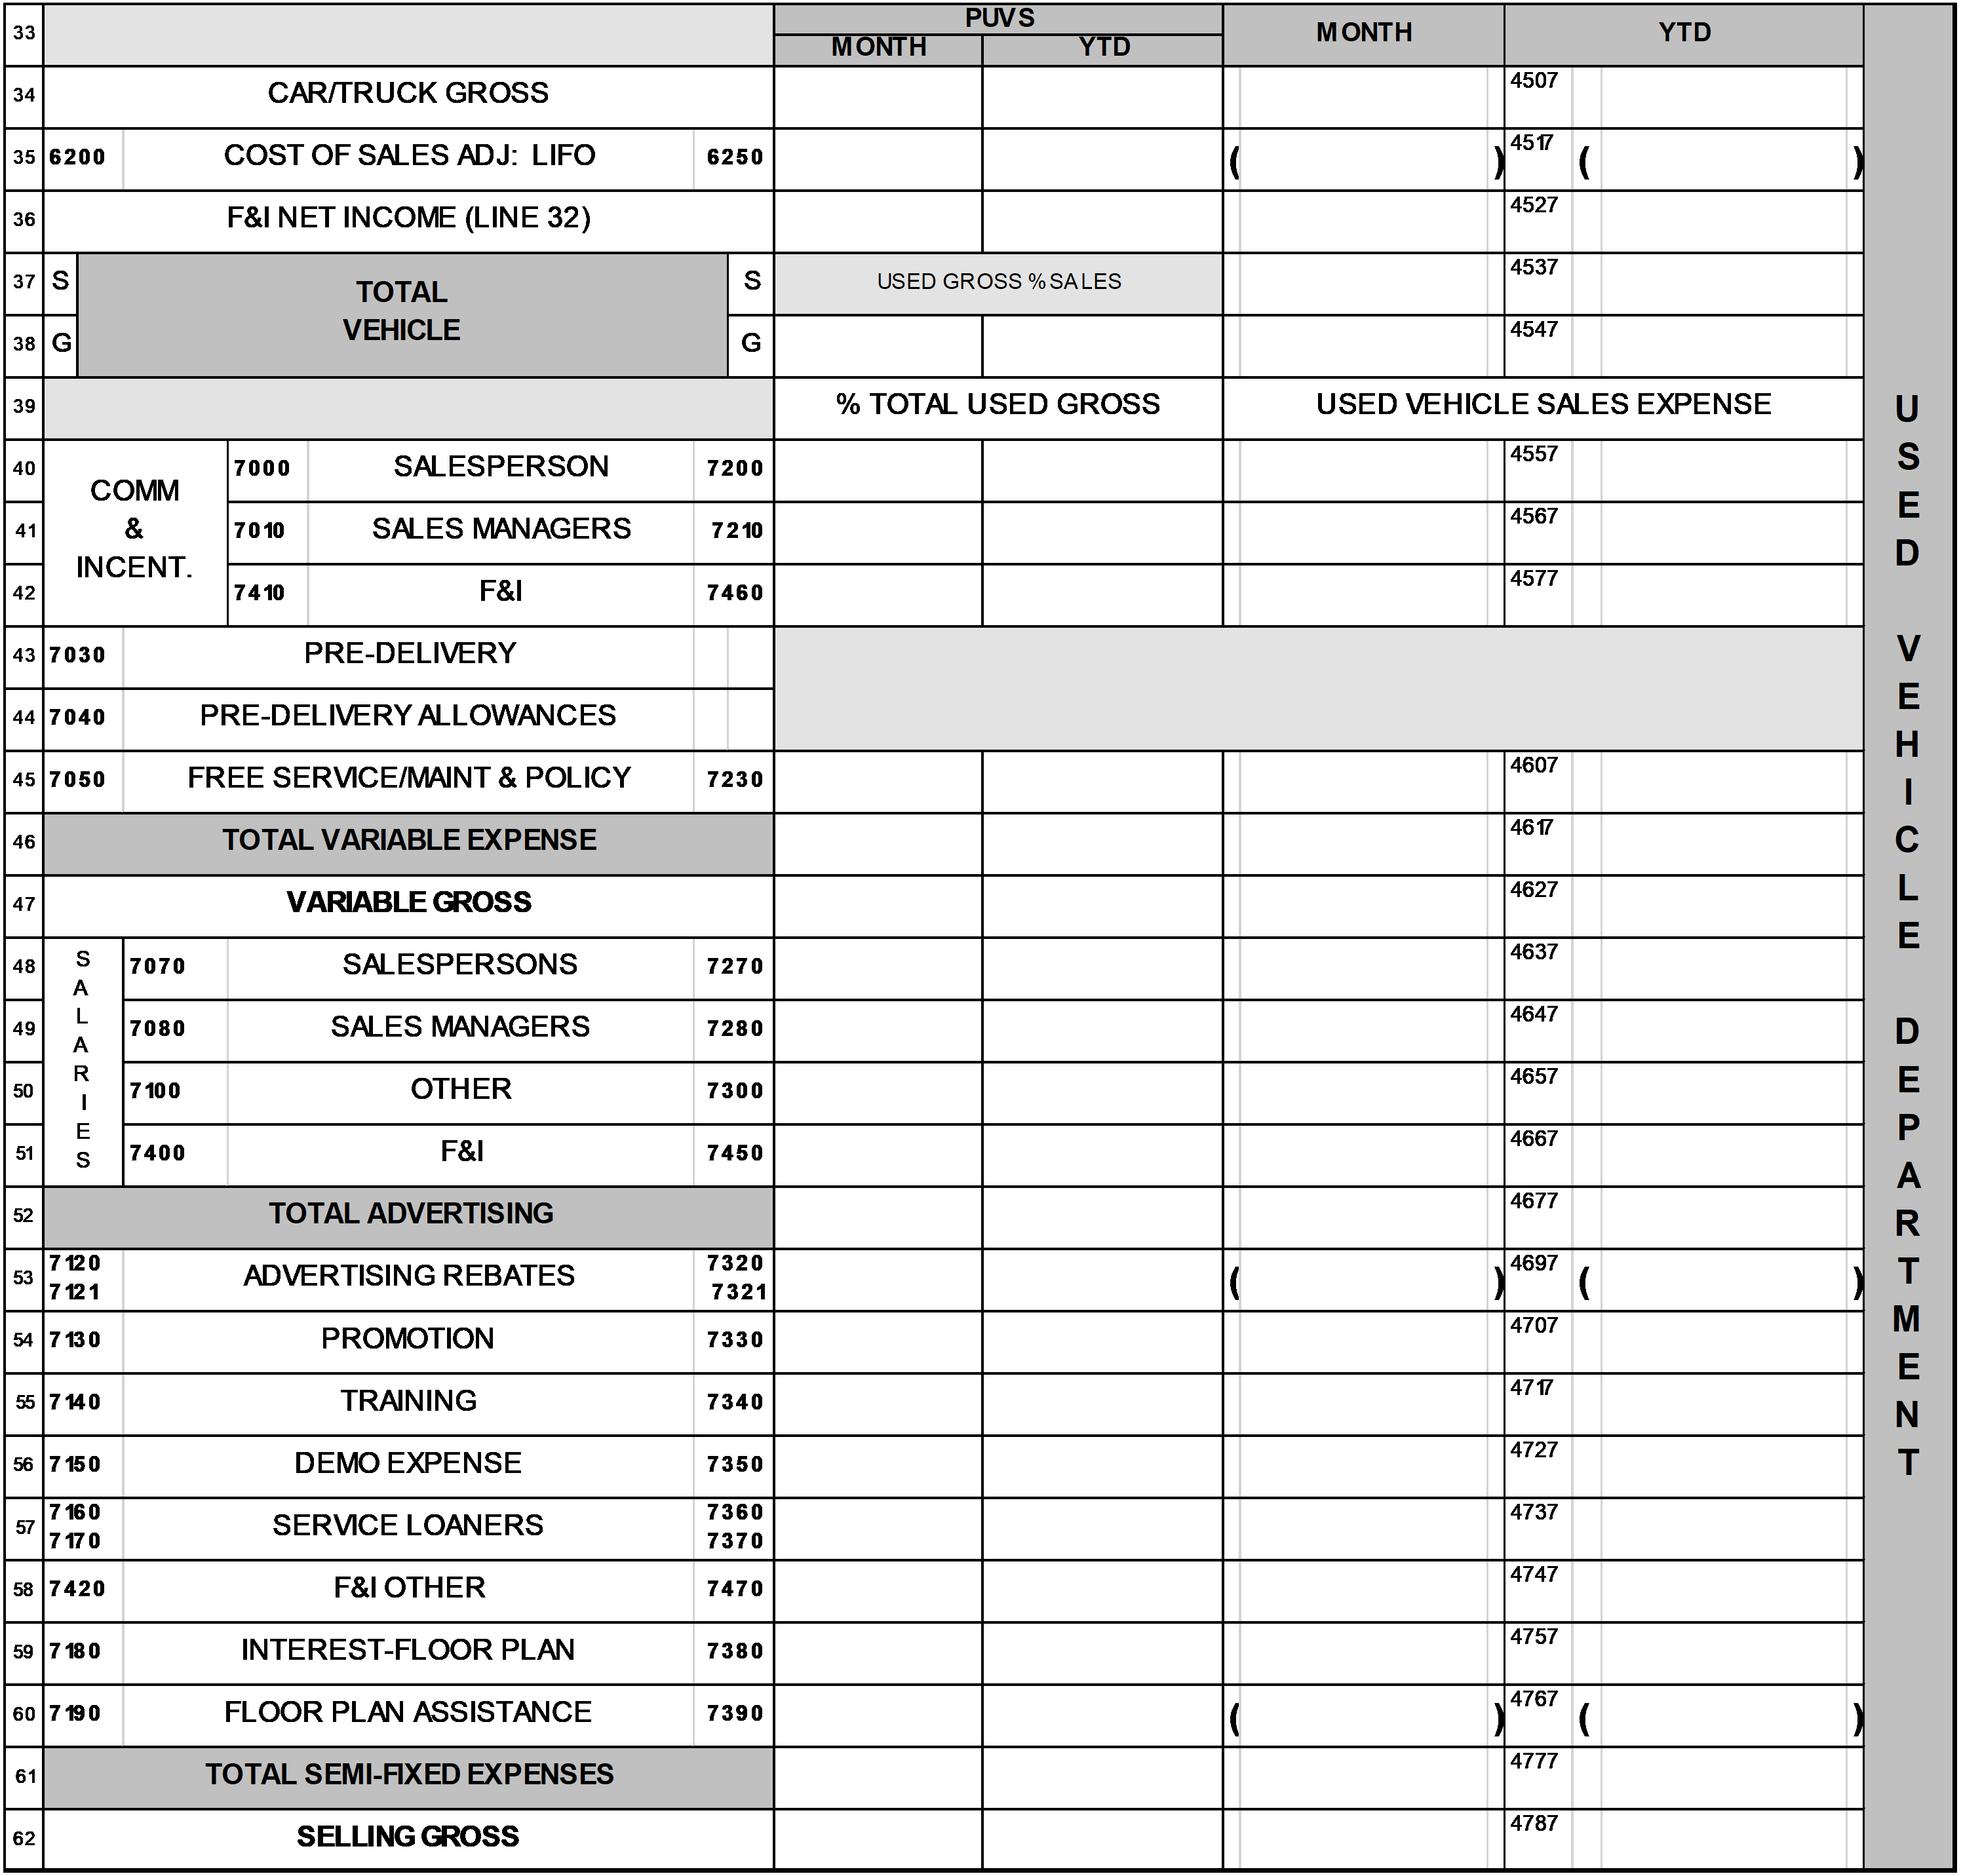 2021 2020 – Page 4 – Used Vehicle Department Sales Expenses